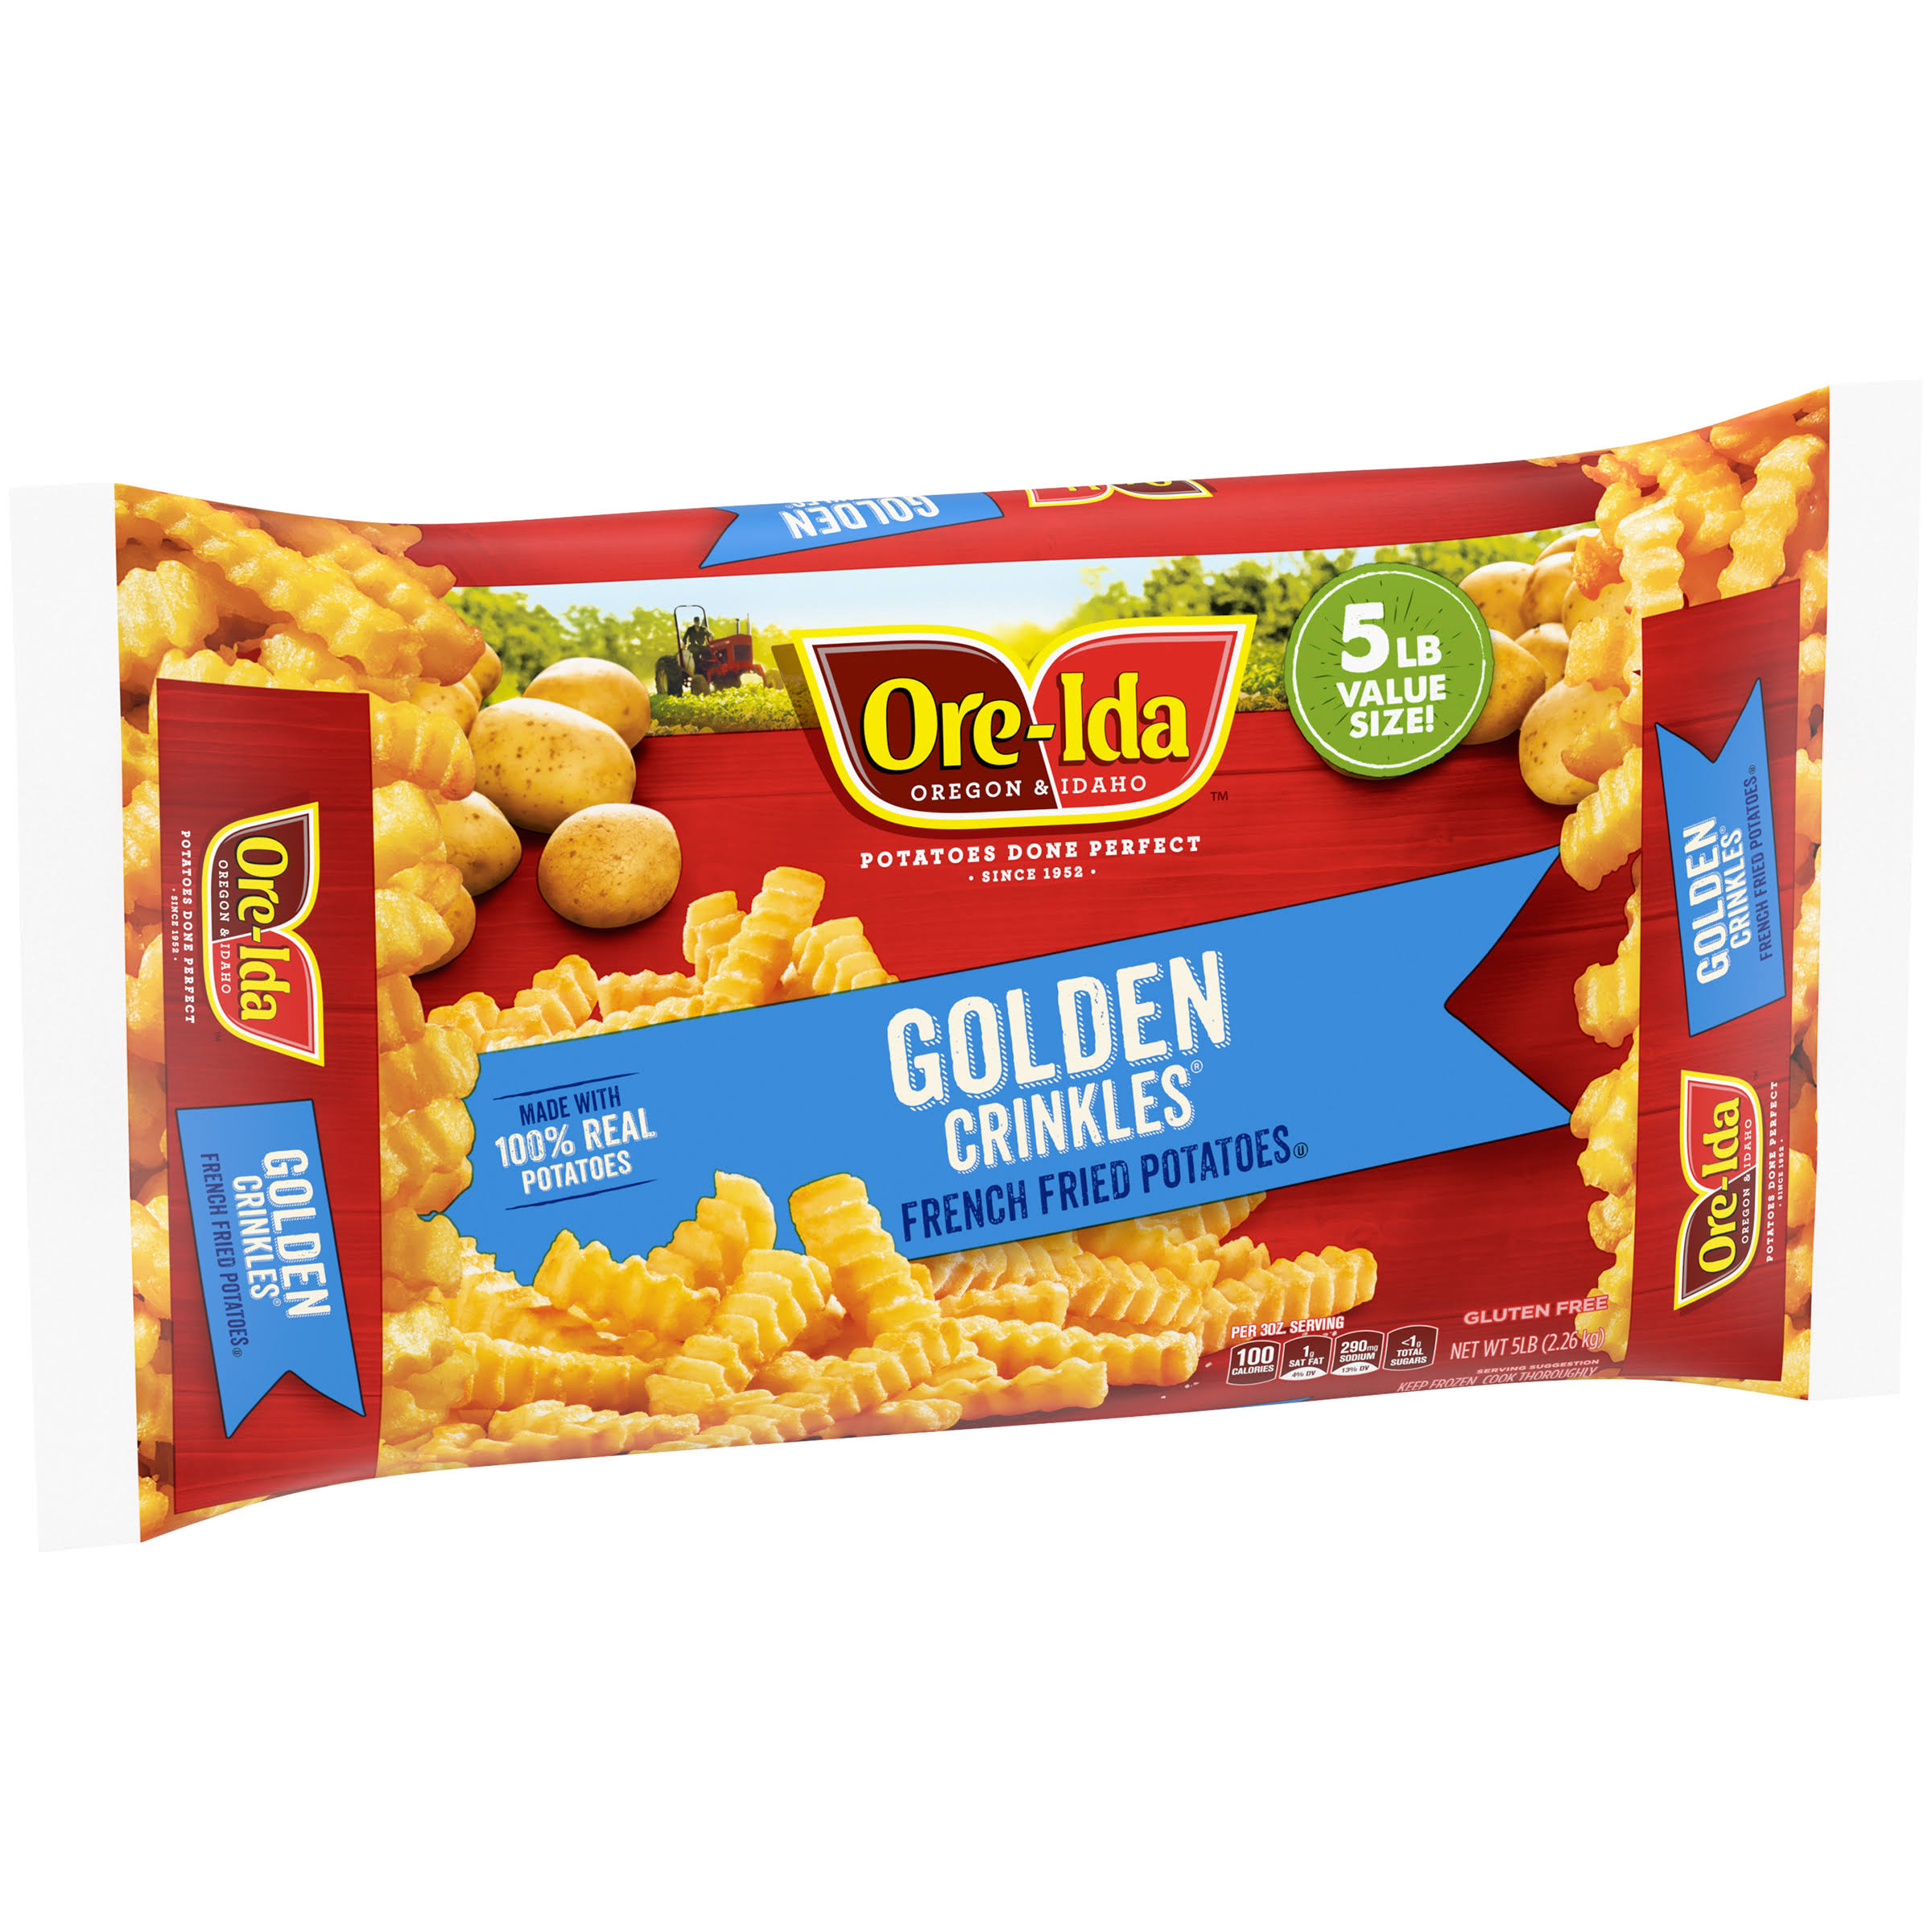 Ore-Ida Golden Crinkles French Fried Potatoes - 5lbs